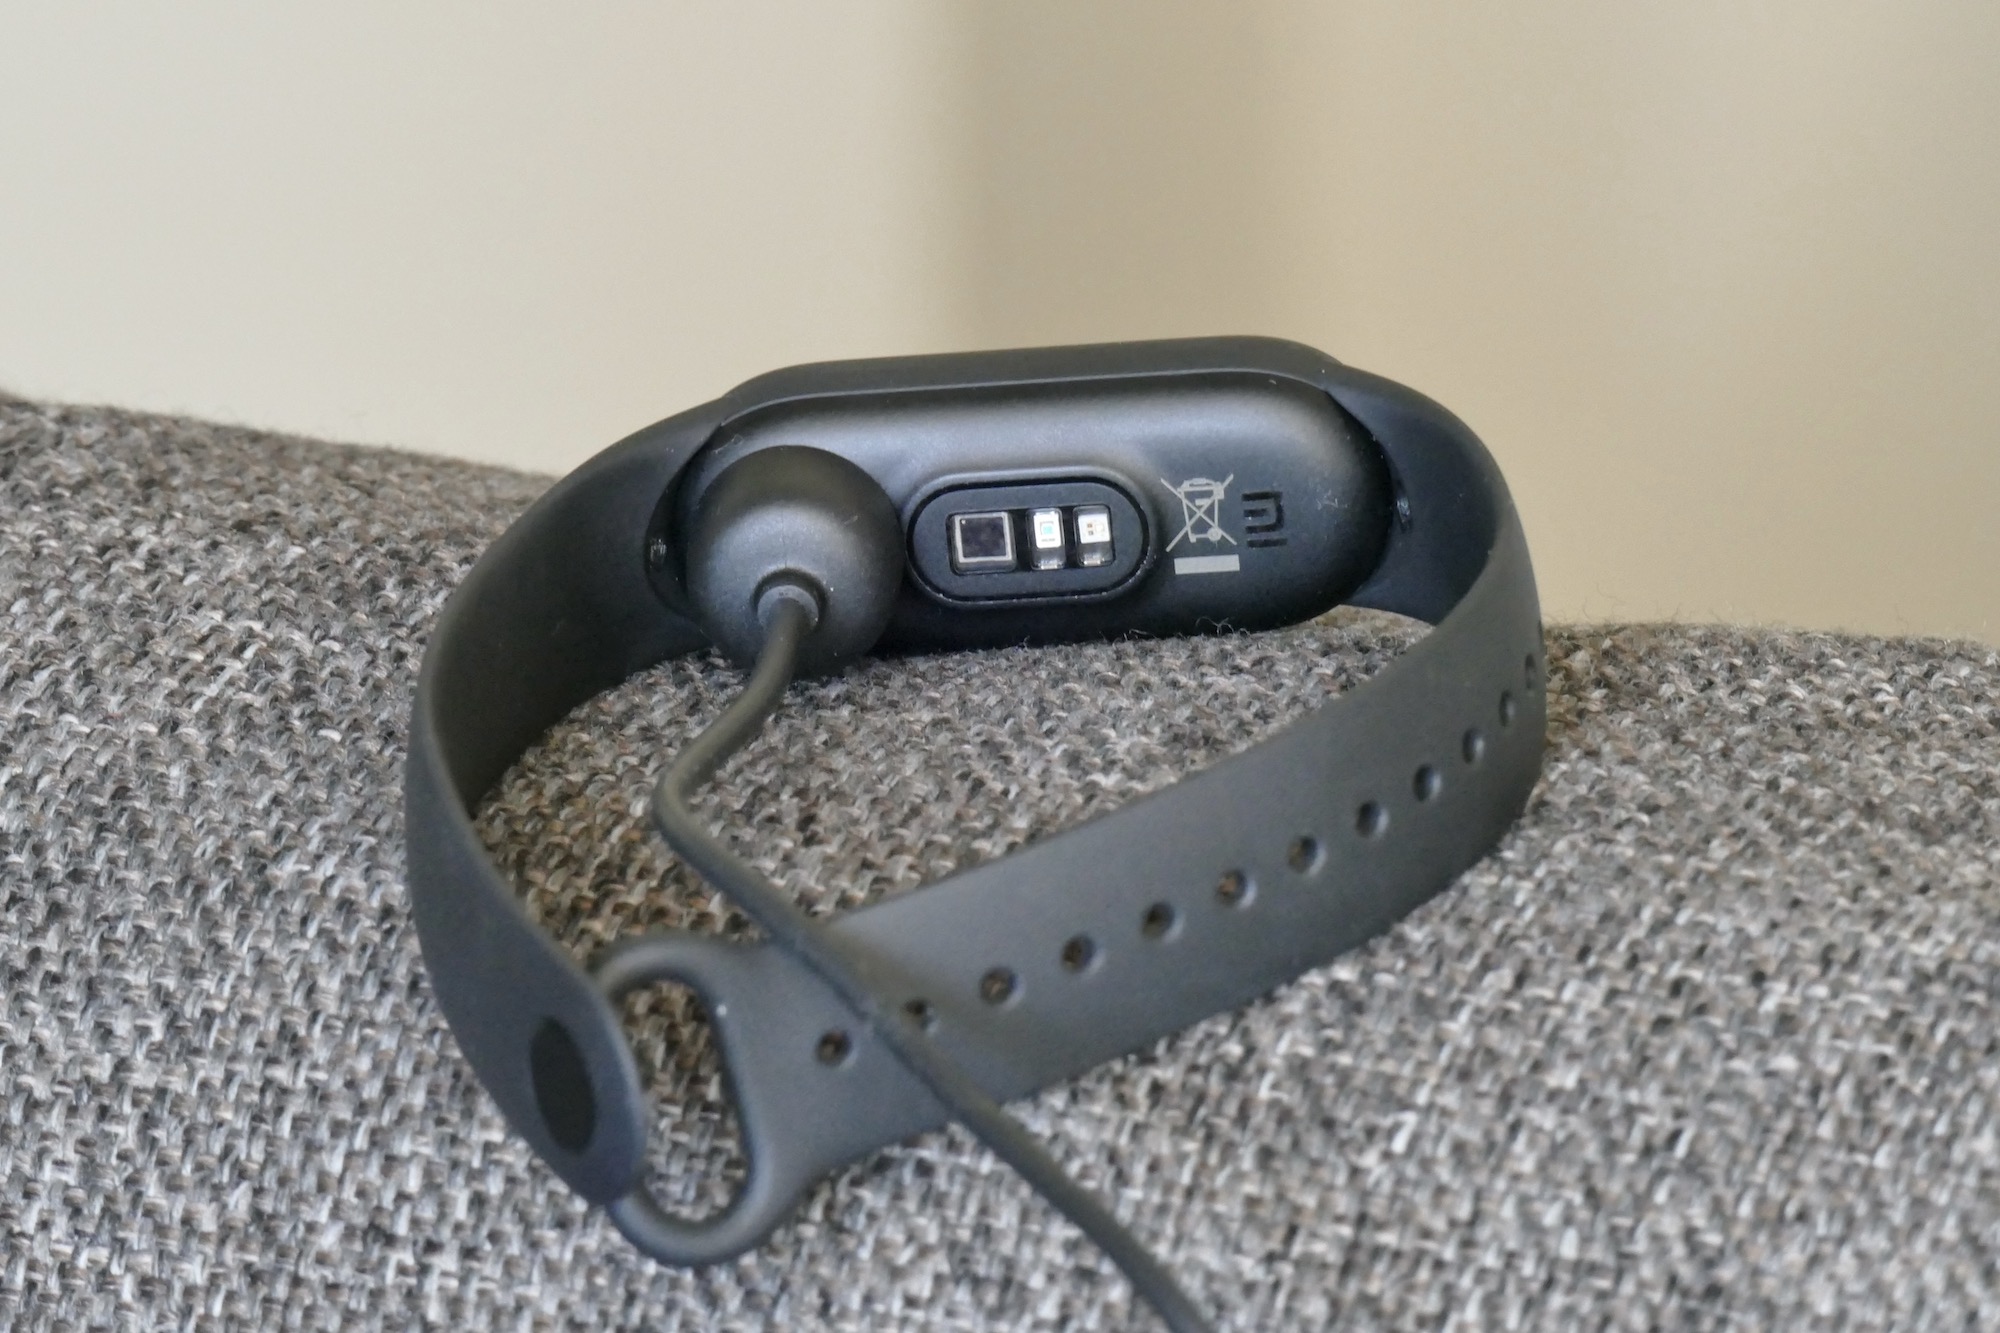 Does the Xiaomi Mi Band 6 work with Mi Band 5 bands?